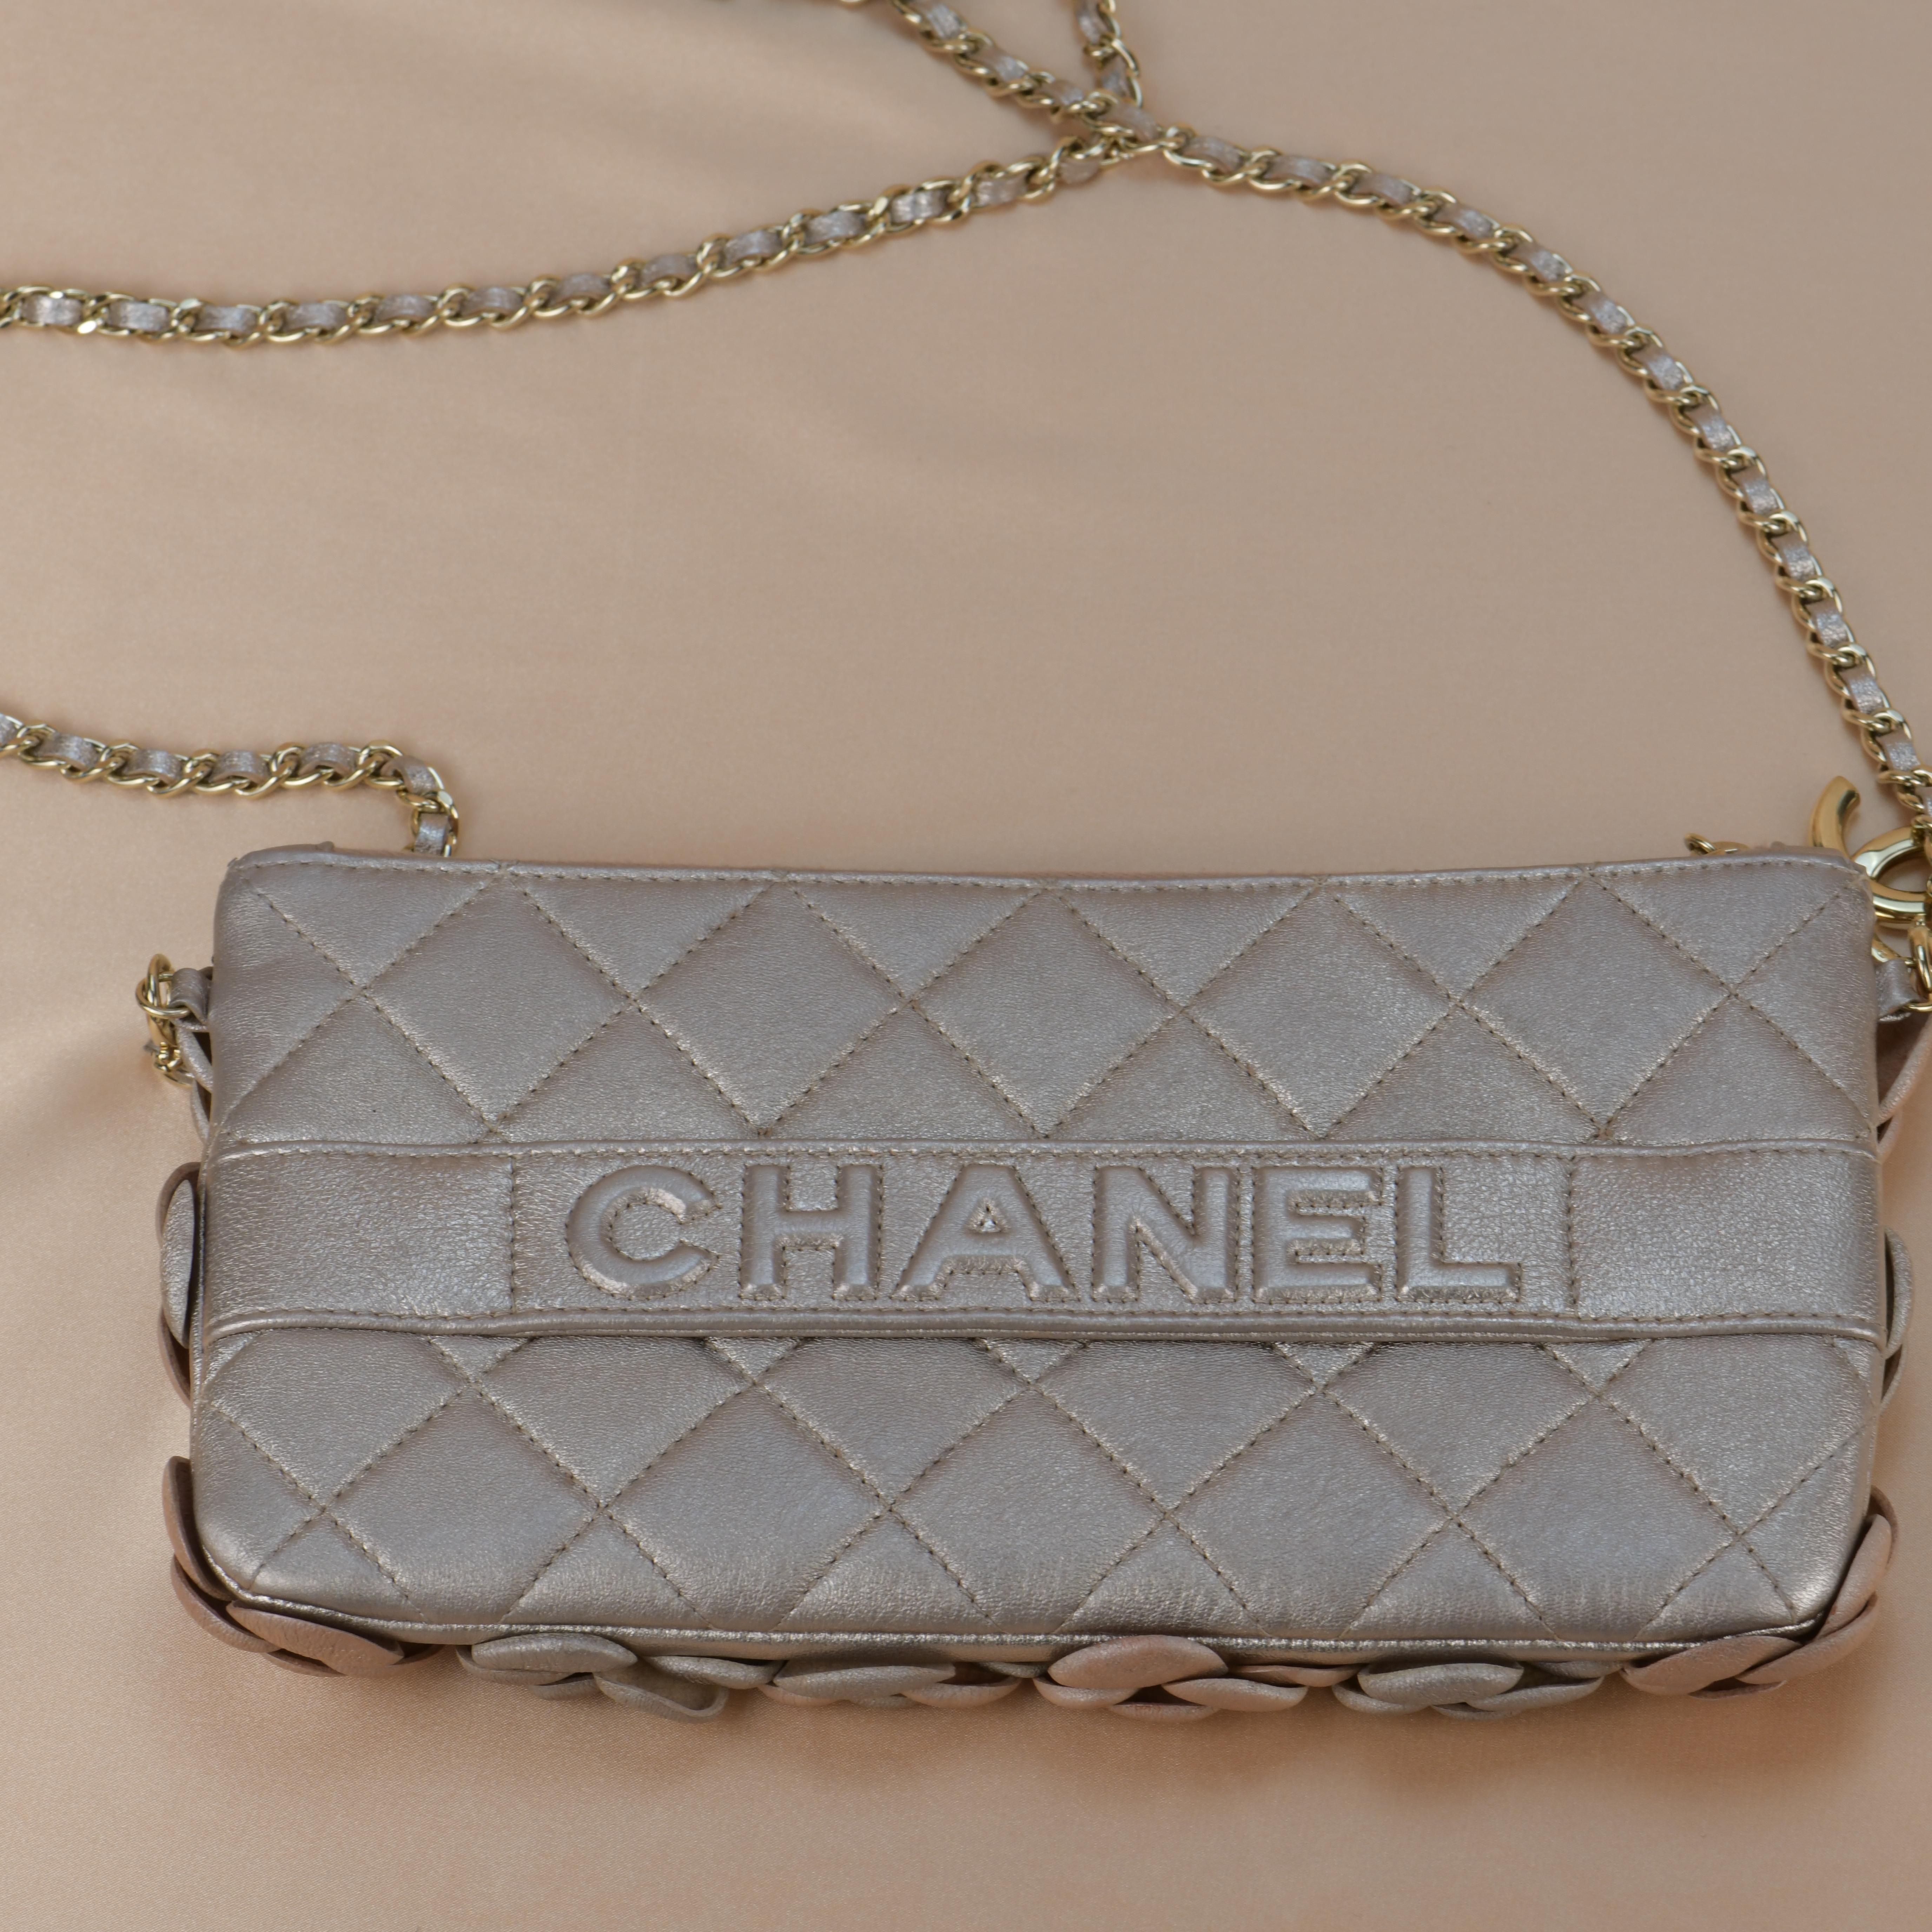 Brand	Chanel
Serial No.	20******
Color	Multicolour
Date	Approx. 2014-2015
Hardware	Gold
Material       Lambskin Leather
Measurements	Approx. 22cm L x 2.5cm D x 12.5cm H 
                                Strap Approx 132cm
Condition	Excellent 
Comes